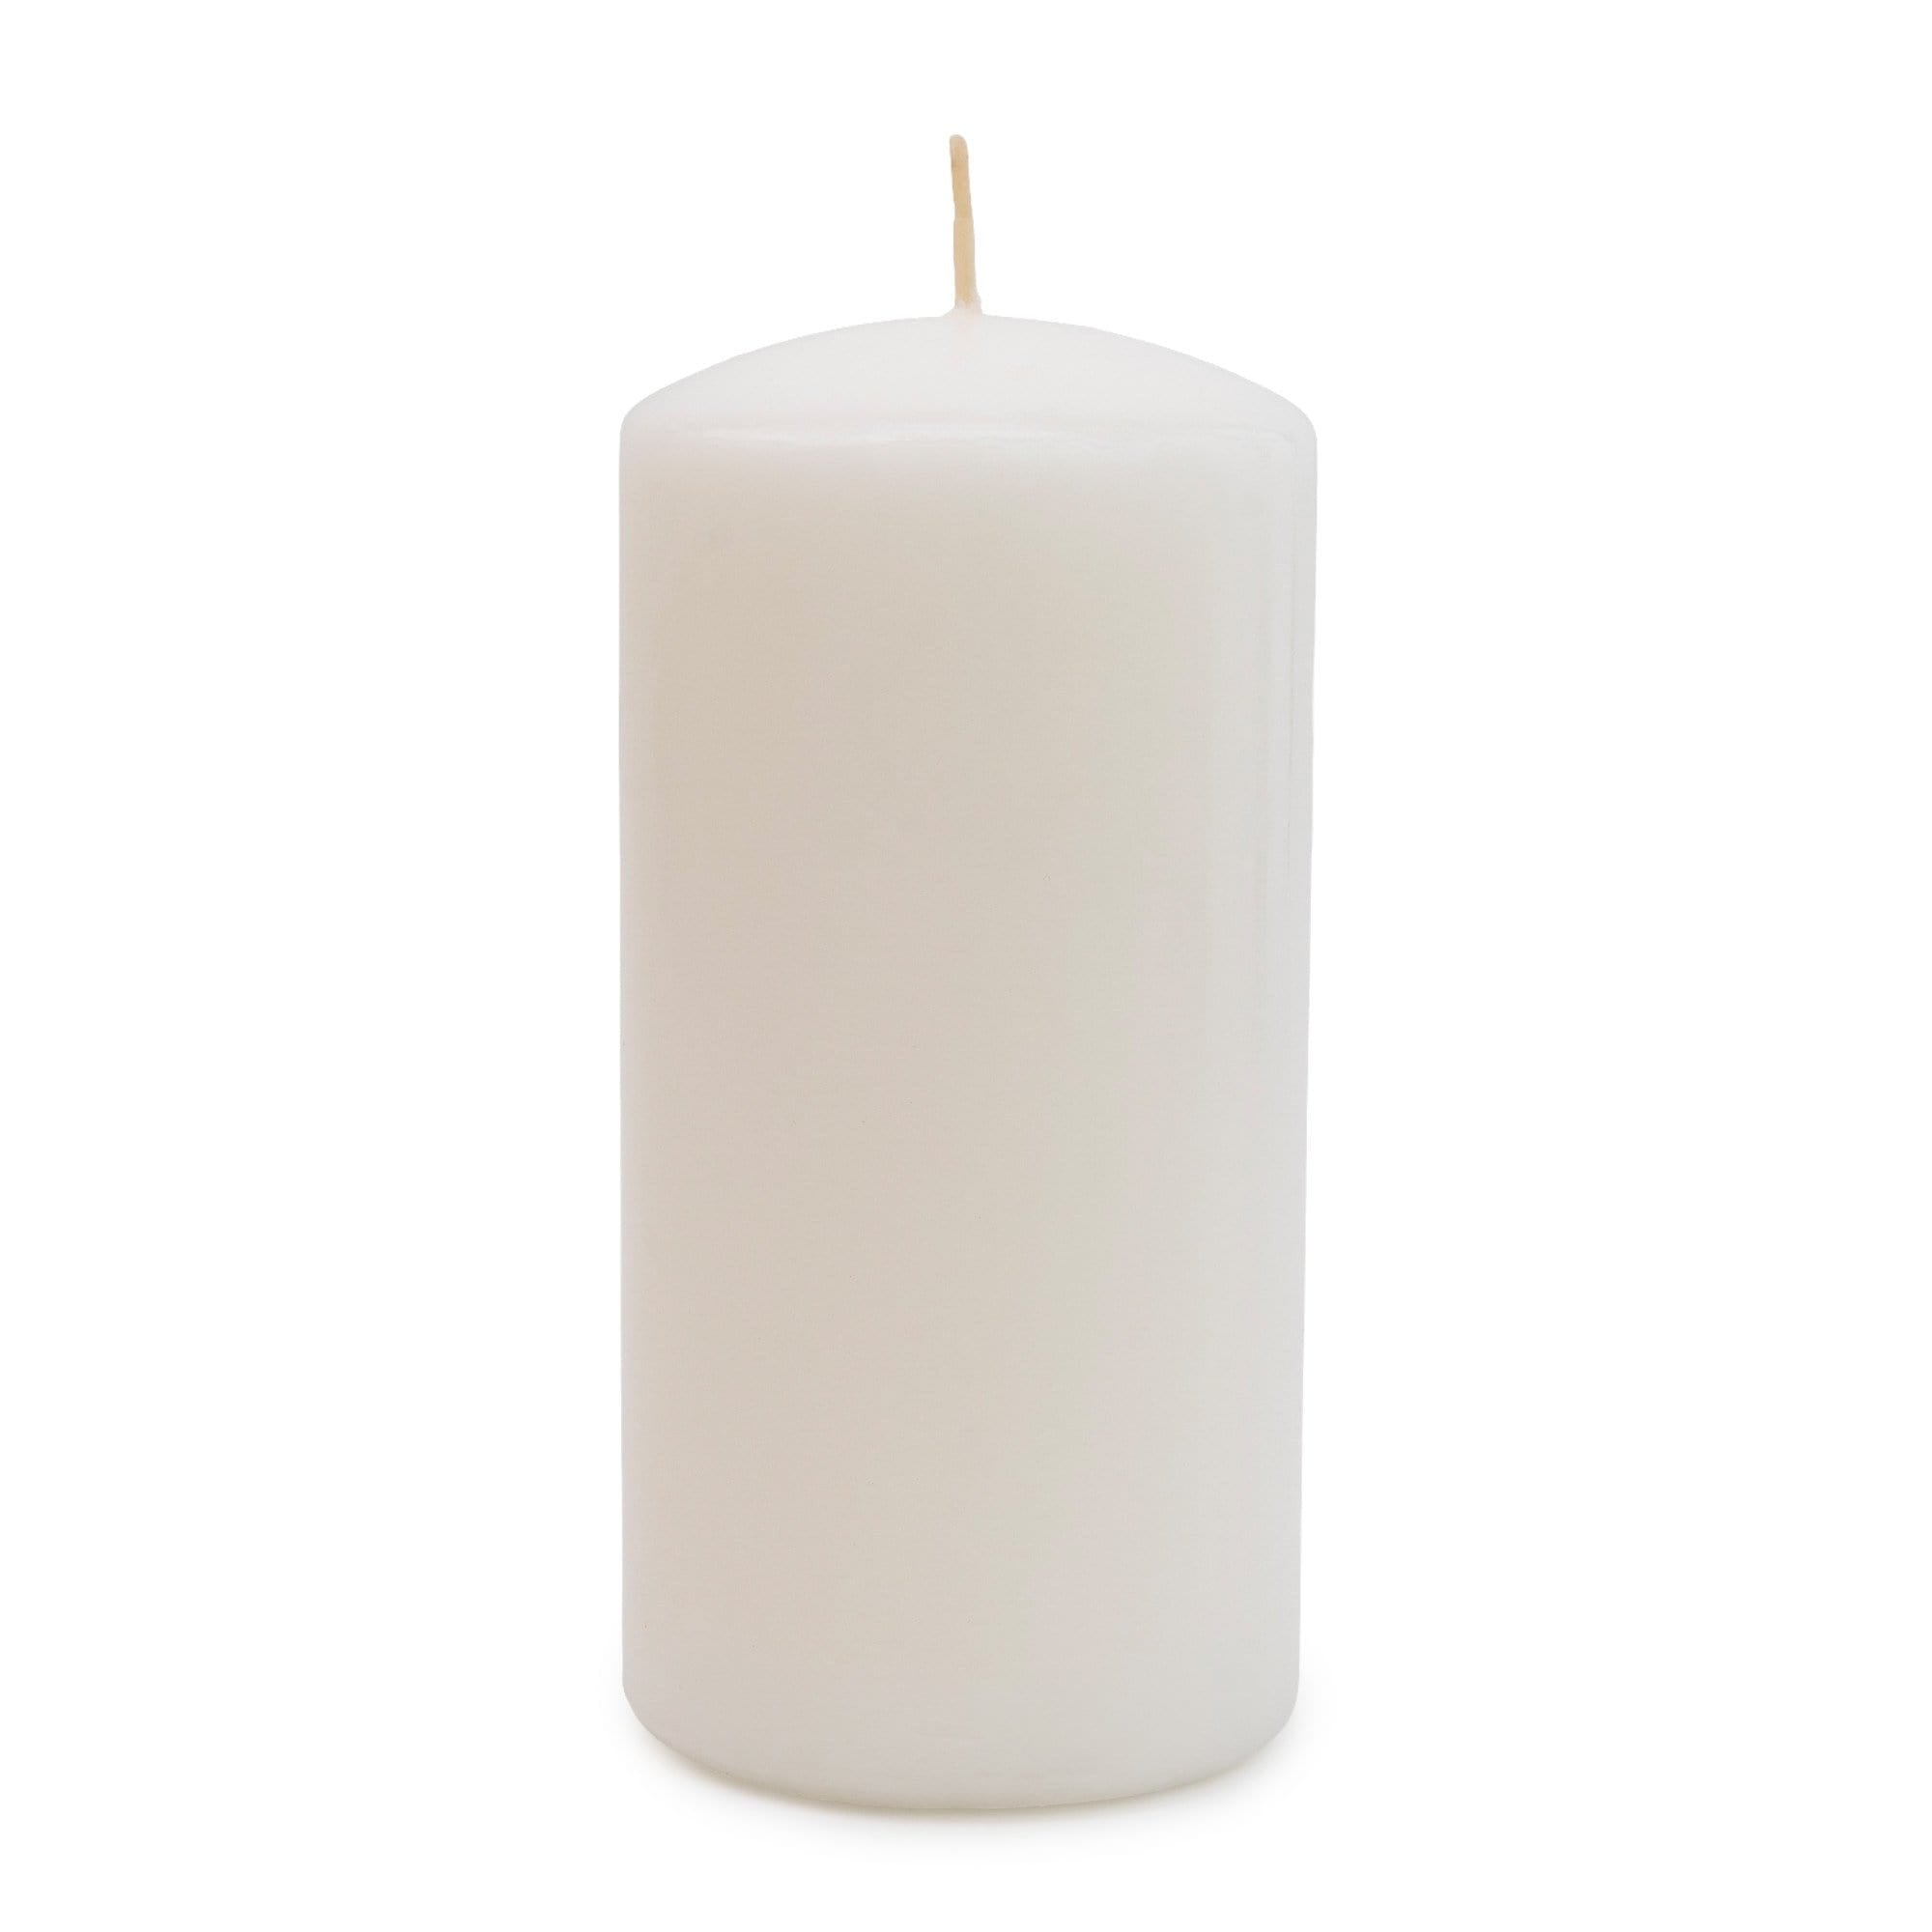 Luxury White Pillar Candle 15cm Tall - Unscented - Kate's Cupboard